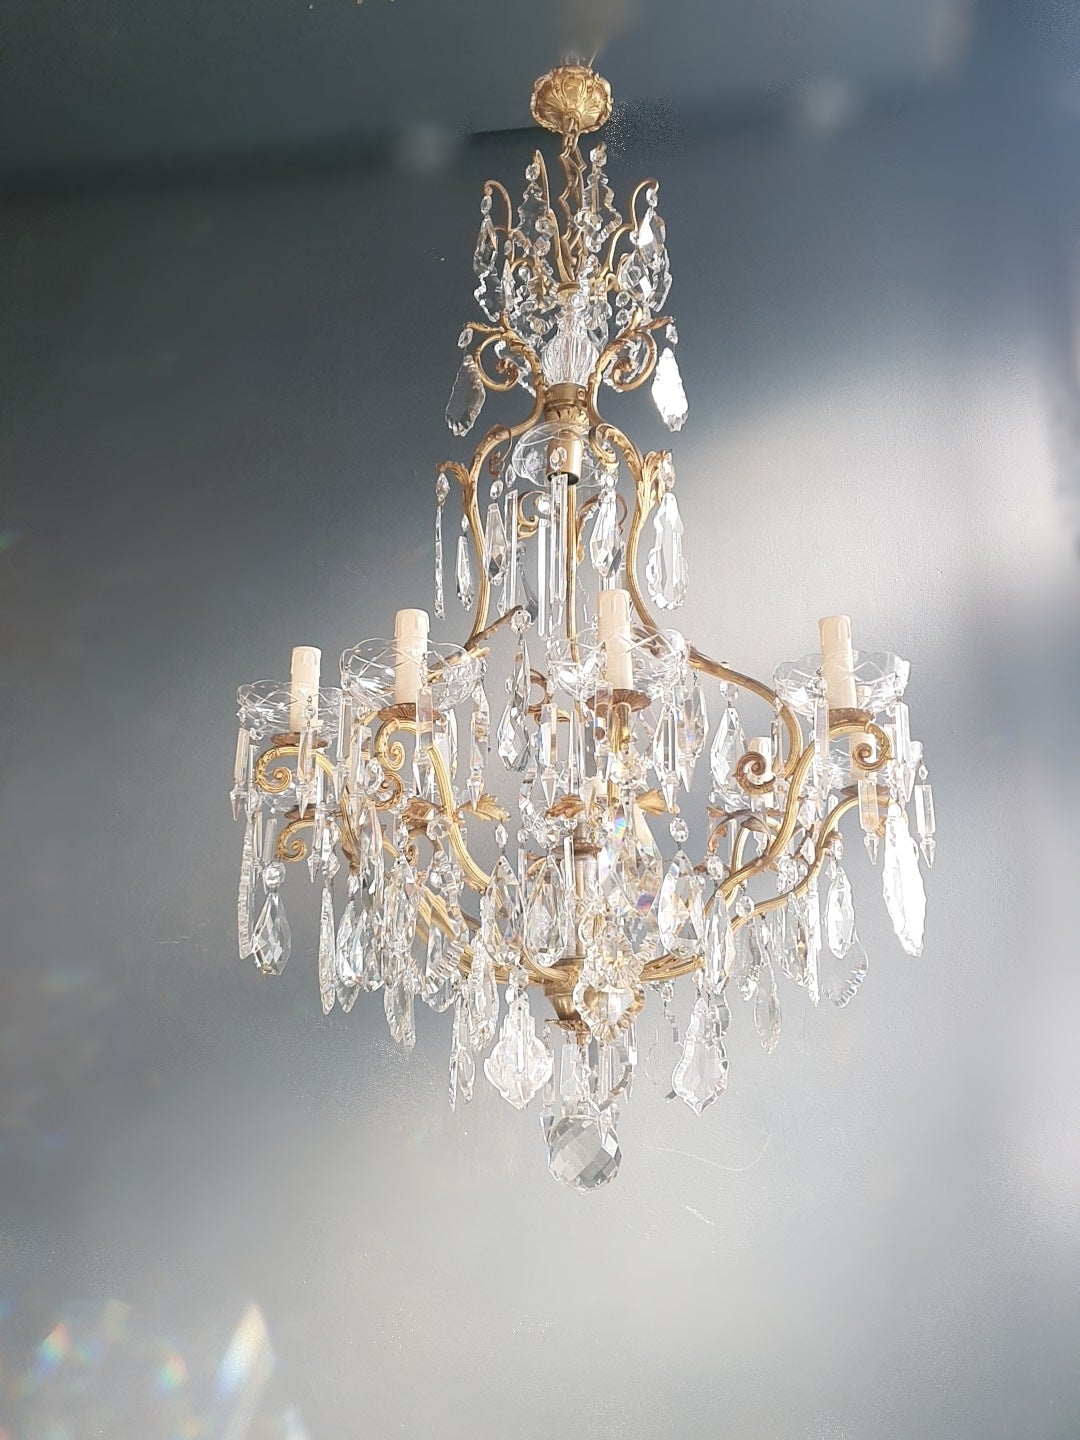 French crystal chandelier antique ceiling lamp lustre Art Nouveau lamp rarity

Measures: Total height 125 cm, height without chain 110 cm, diameter 73 cm. Weight (approximately): 15kg.

Number of lights: Nine-light bulb sockets: E14 and One E27